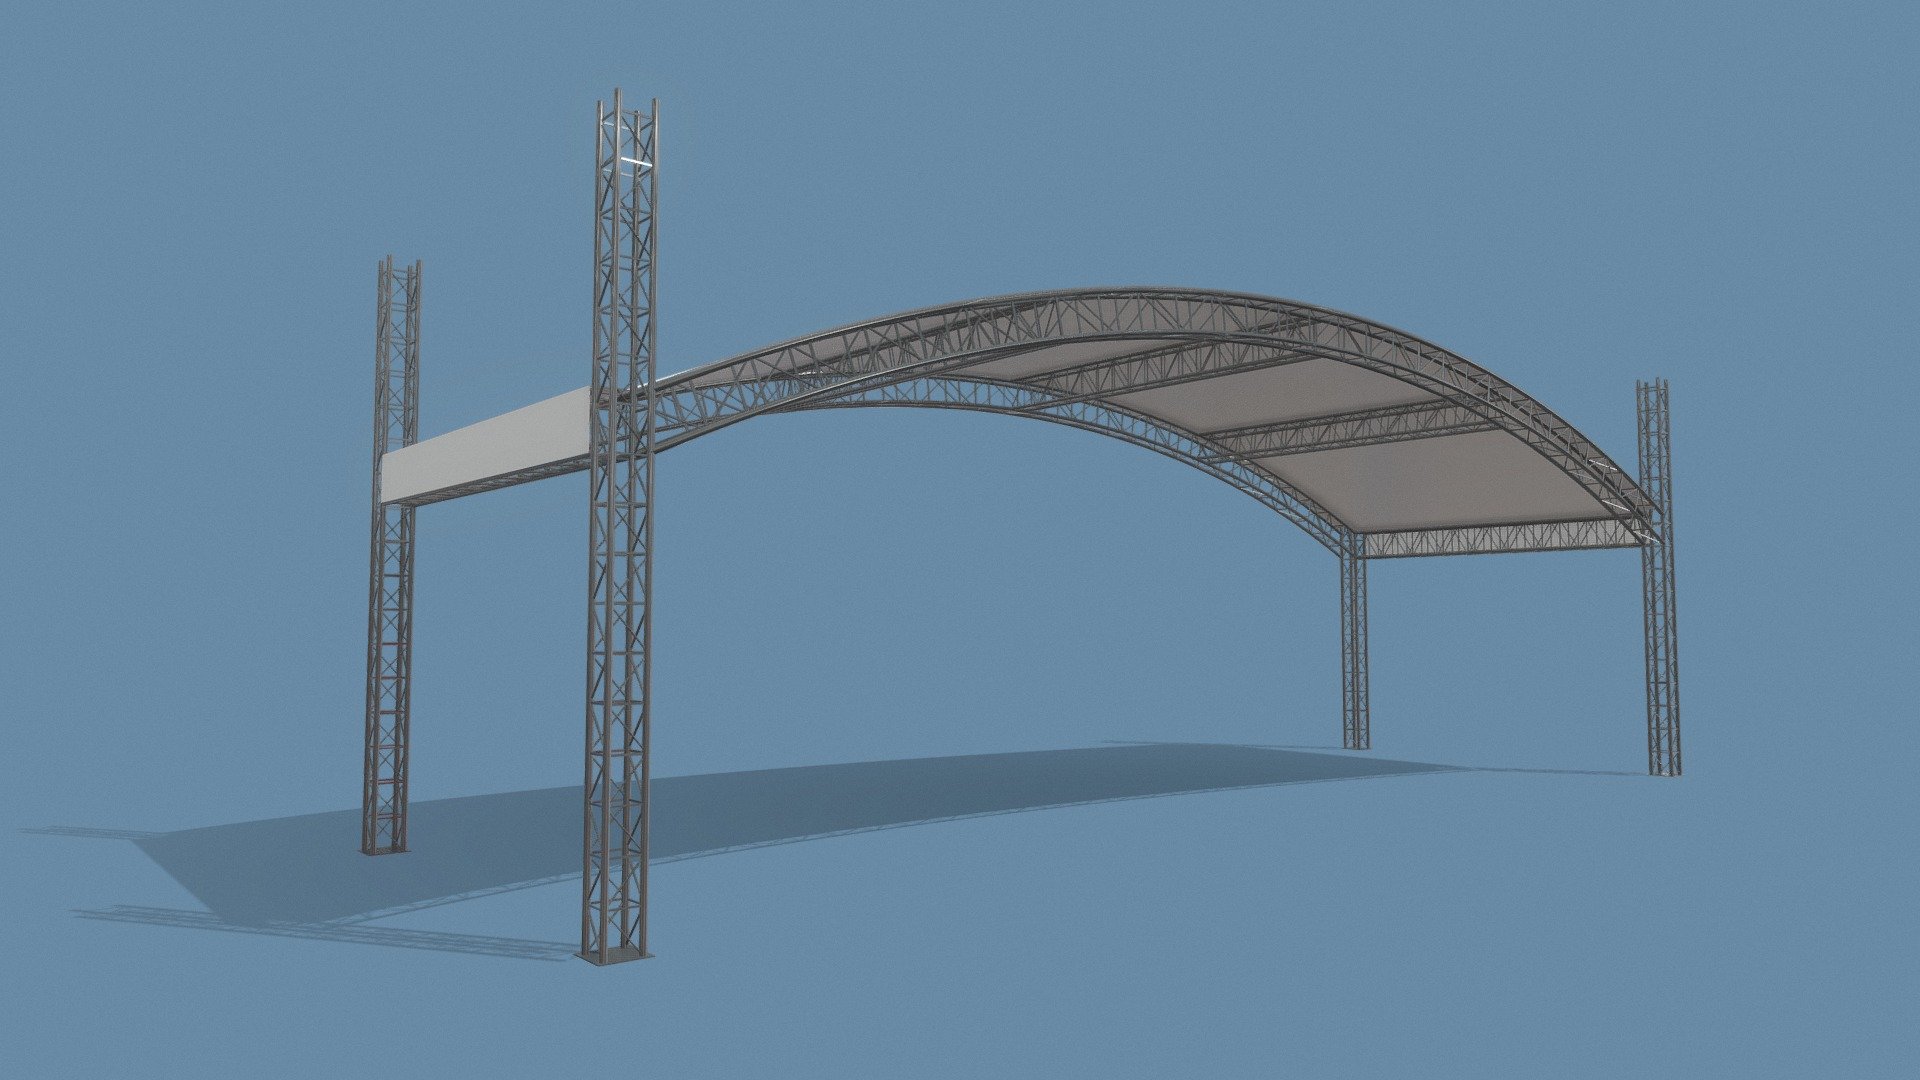 Giant Truss Arch Tent

Measurements:


30.00m x 10.00m x 10.40m (L,W,H)
Highest part of the arch is 10.00m
Lowest Part of the Arch is 6.00m

IMPORTANT NOTES:


This model does not have textures or materials, but it has separate generic materials, it is also separated into parts, so you can easily assign your own materials.
Model units are in meters.

If you have any questions about this model, you can send us a message 3d model